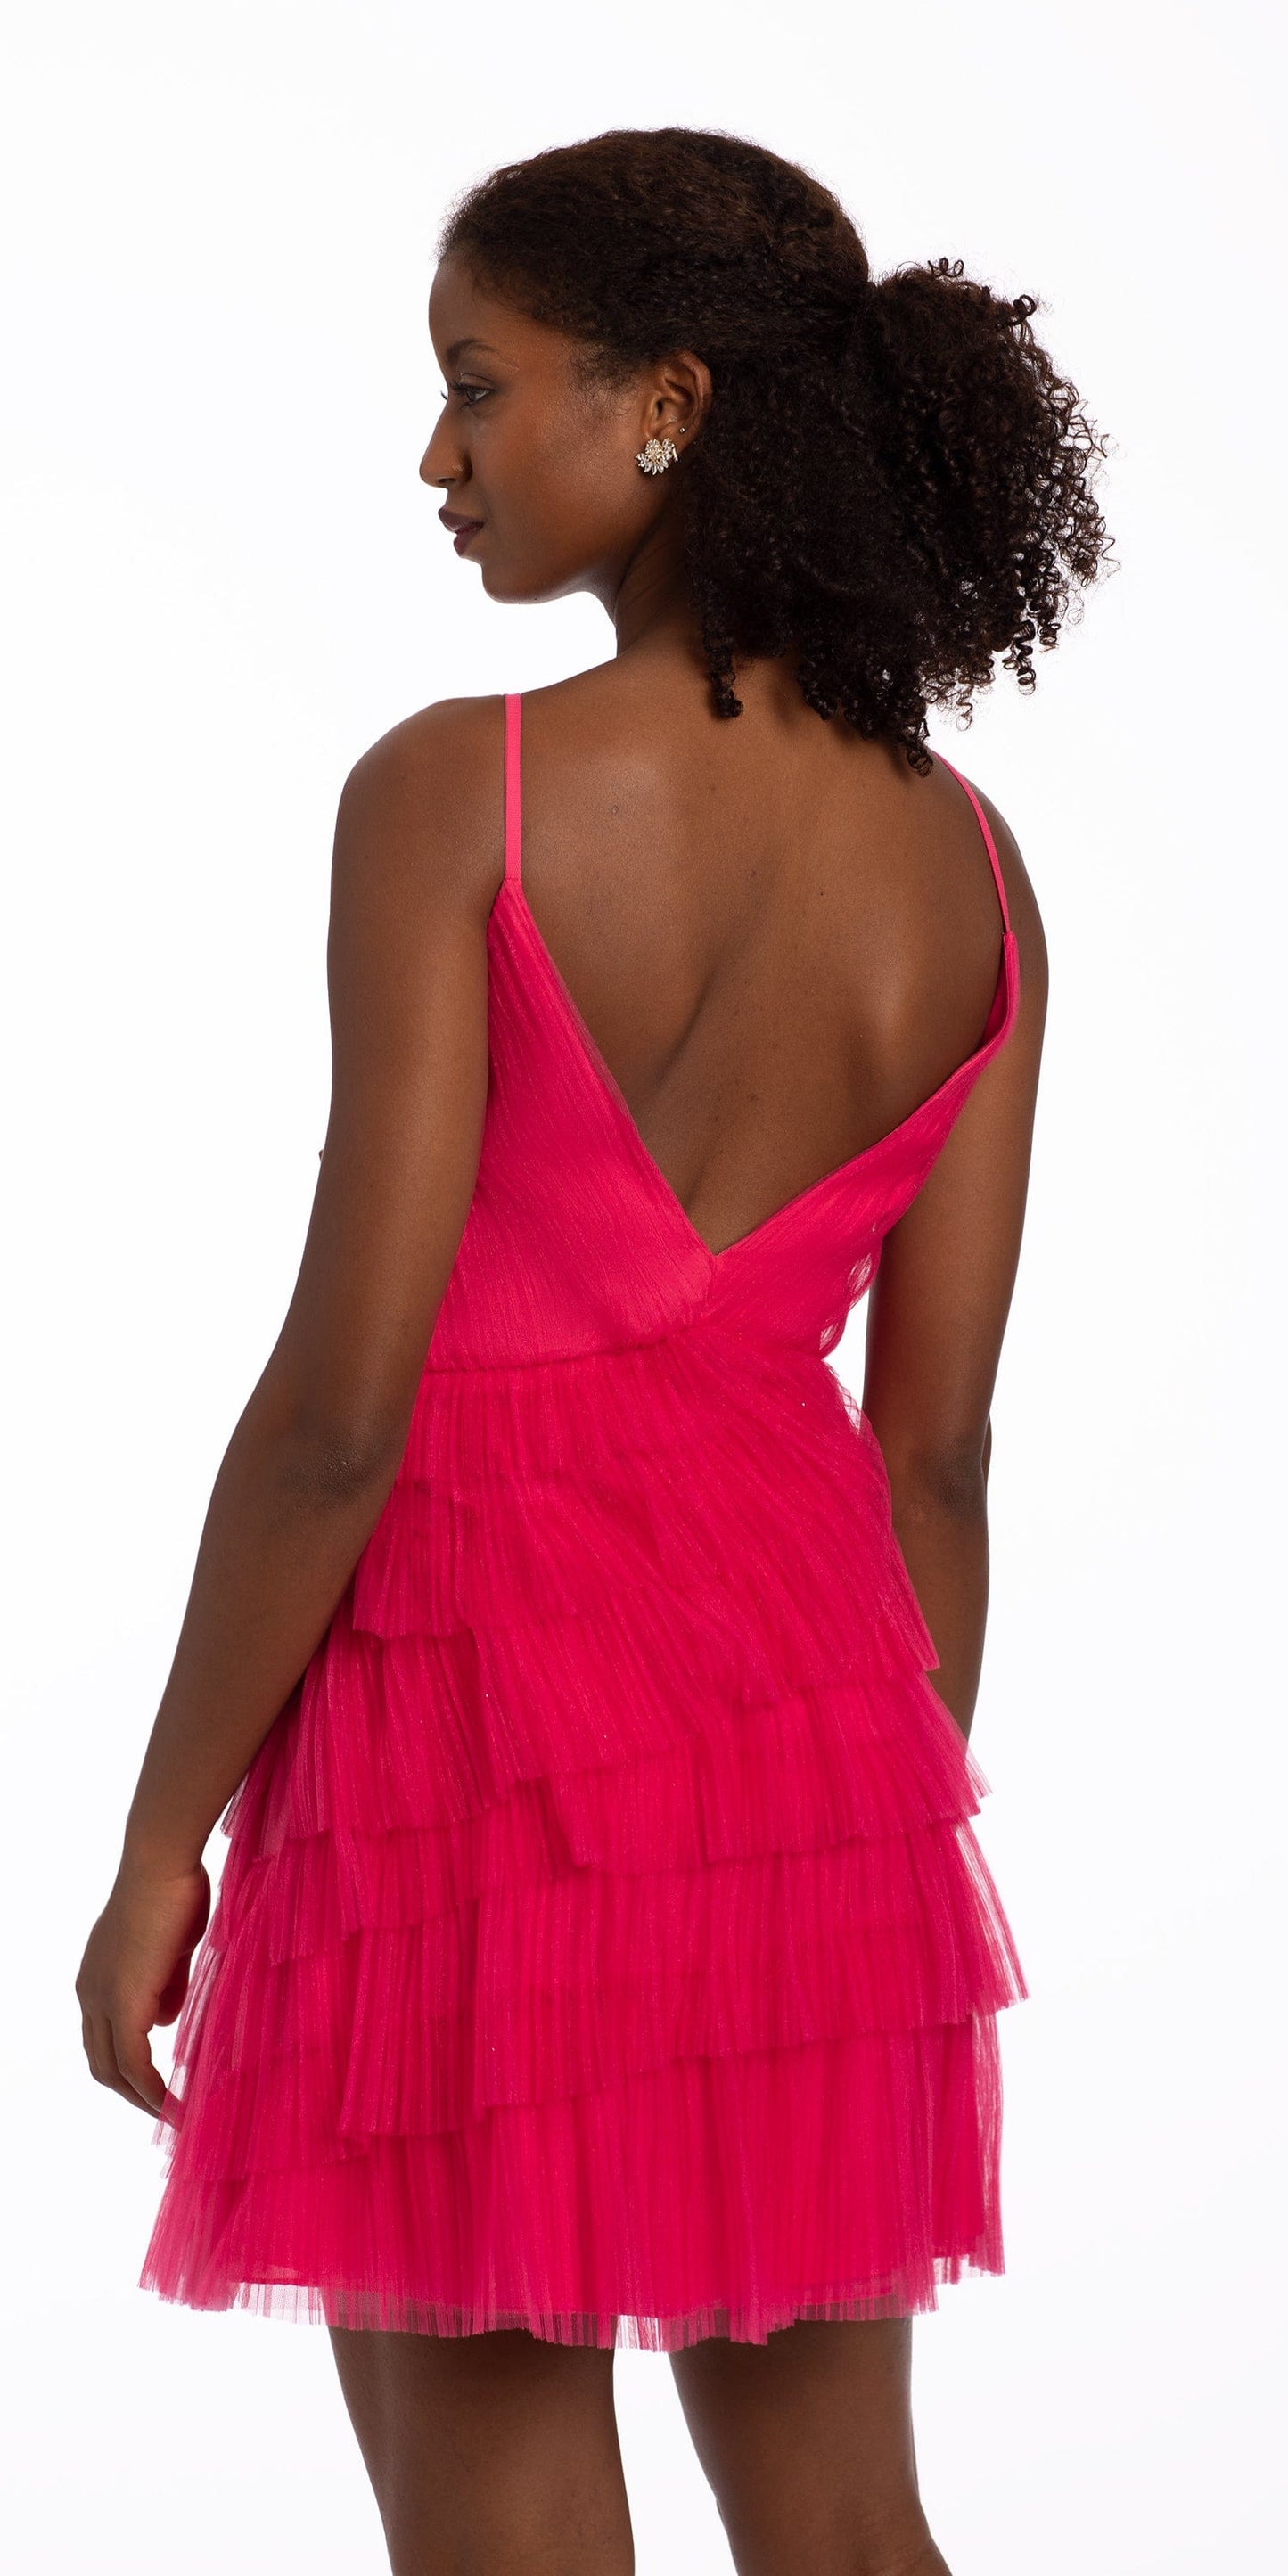 Camille La Vie Plunging Pleated Mesh Tiered Dress